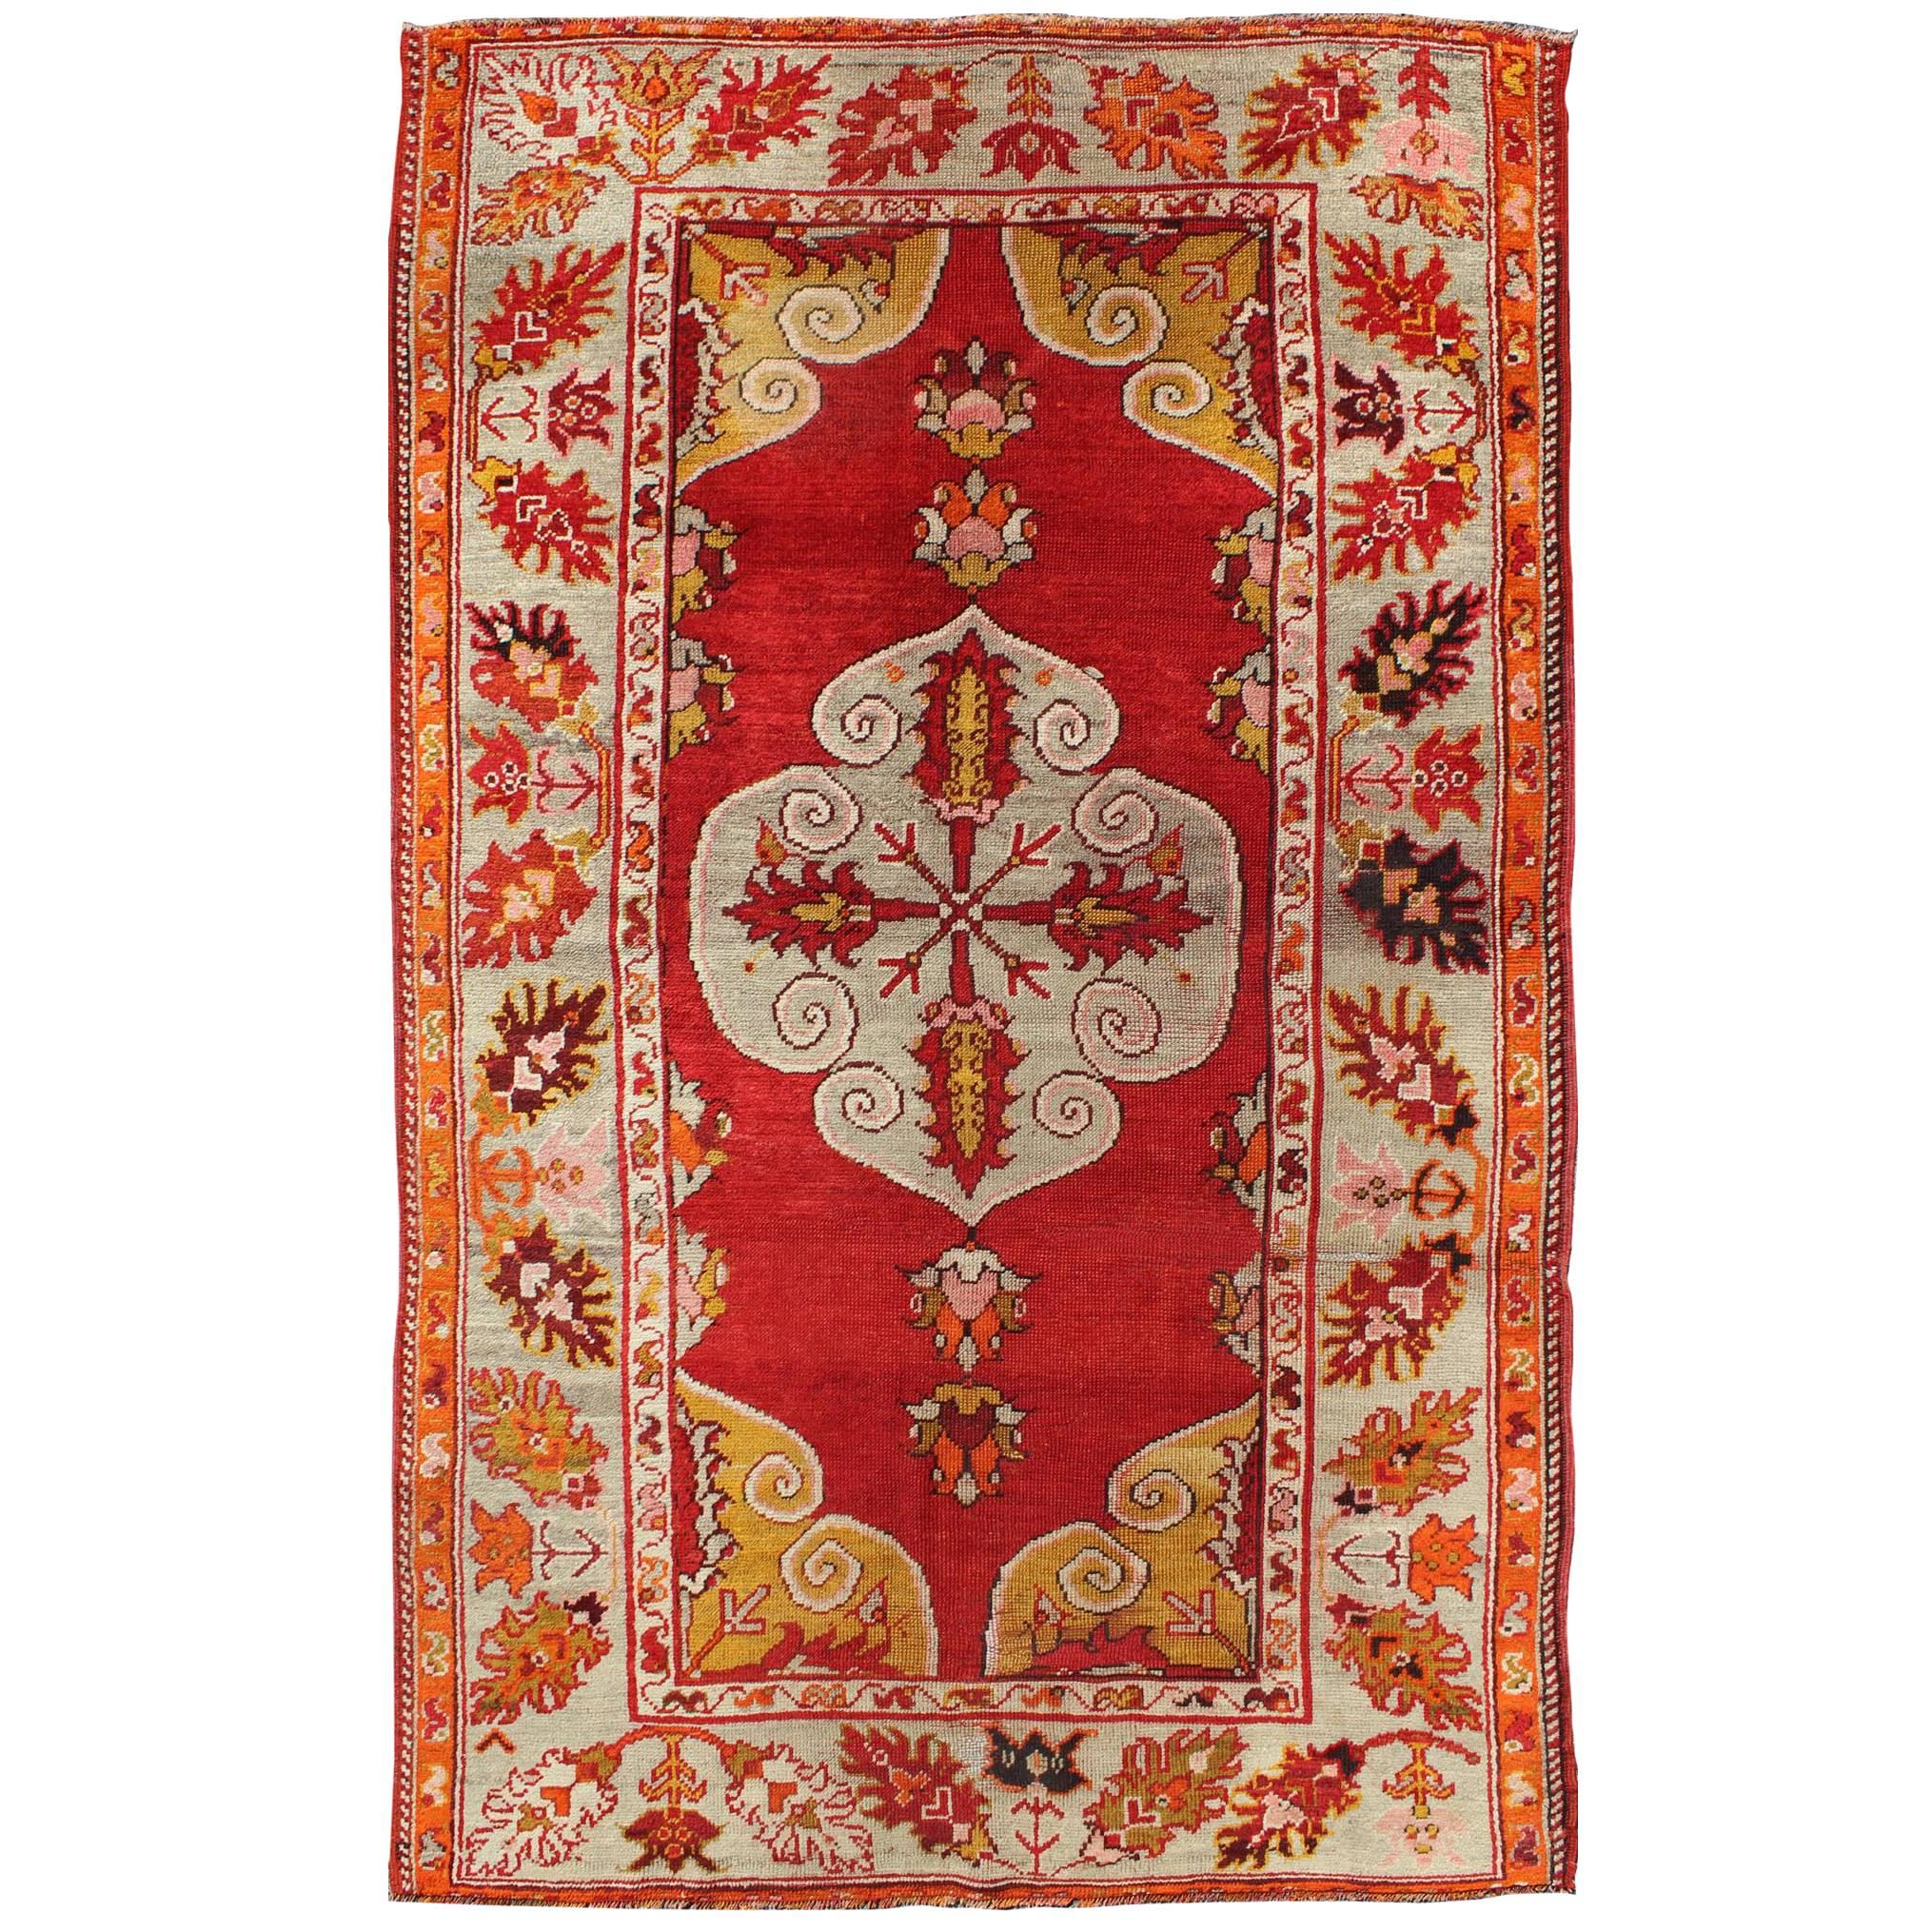 Center Medallion Antique Turkish Oushak Rug with Red Ground & Multi Colors